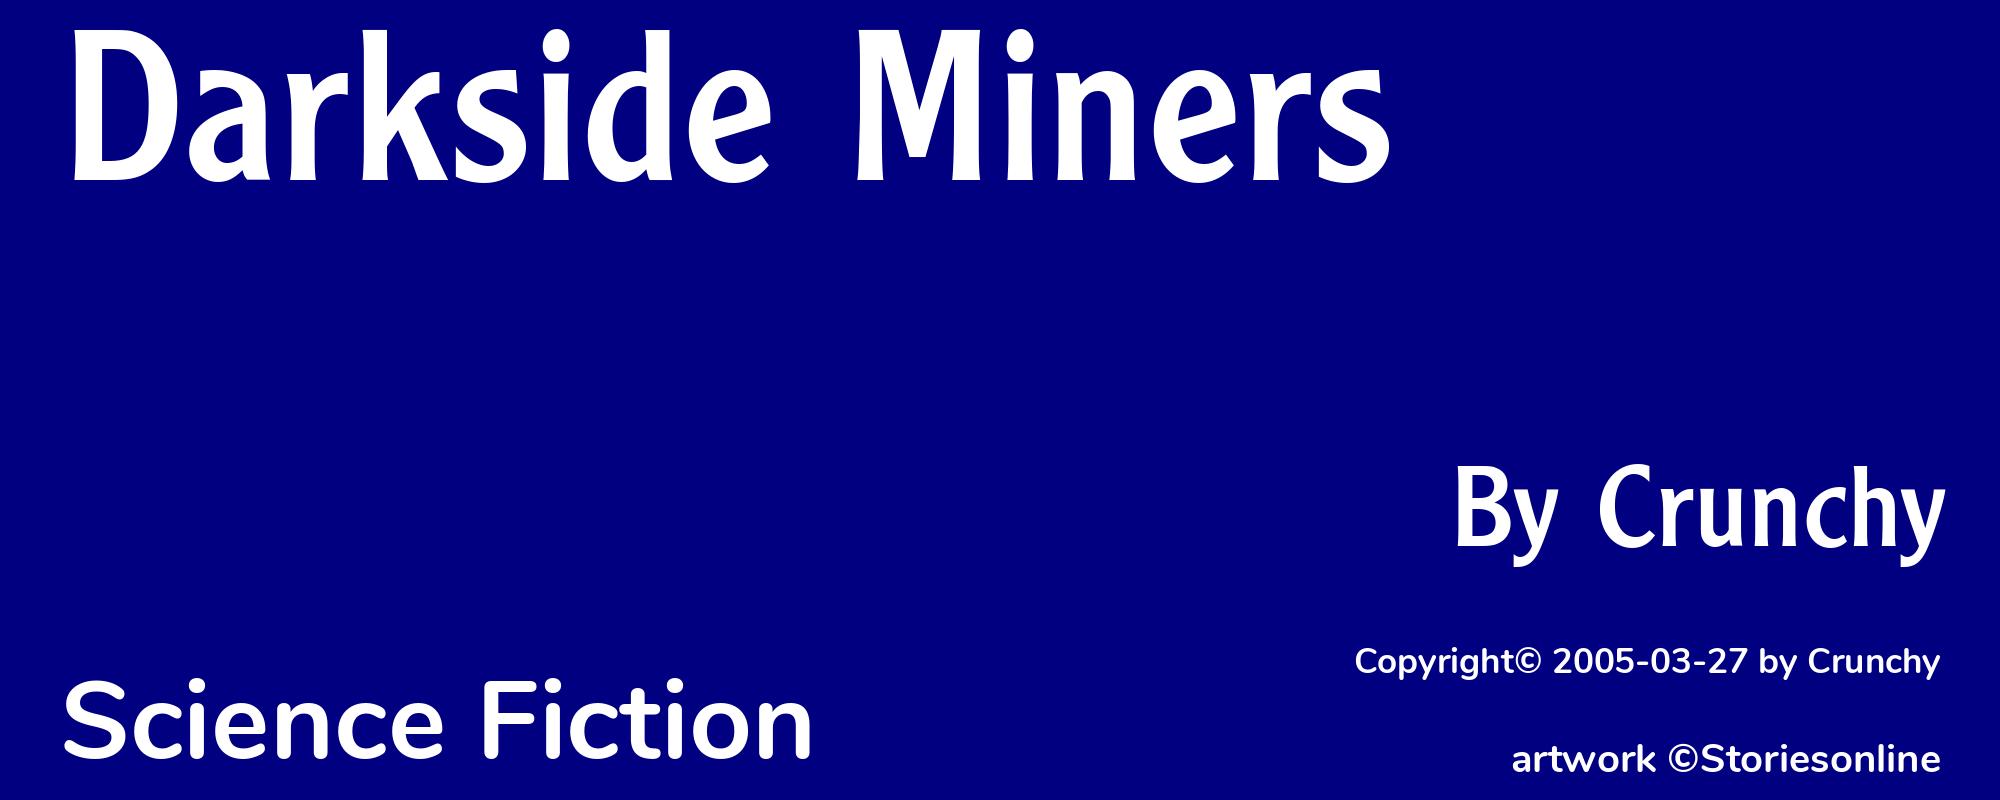 Darkside Miners - Cover